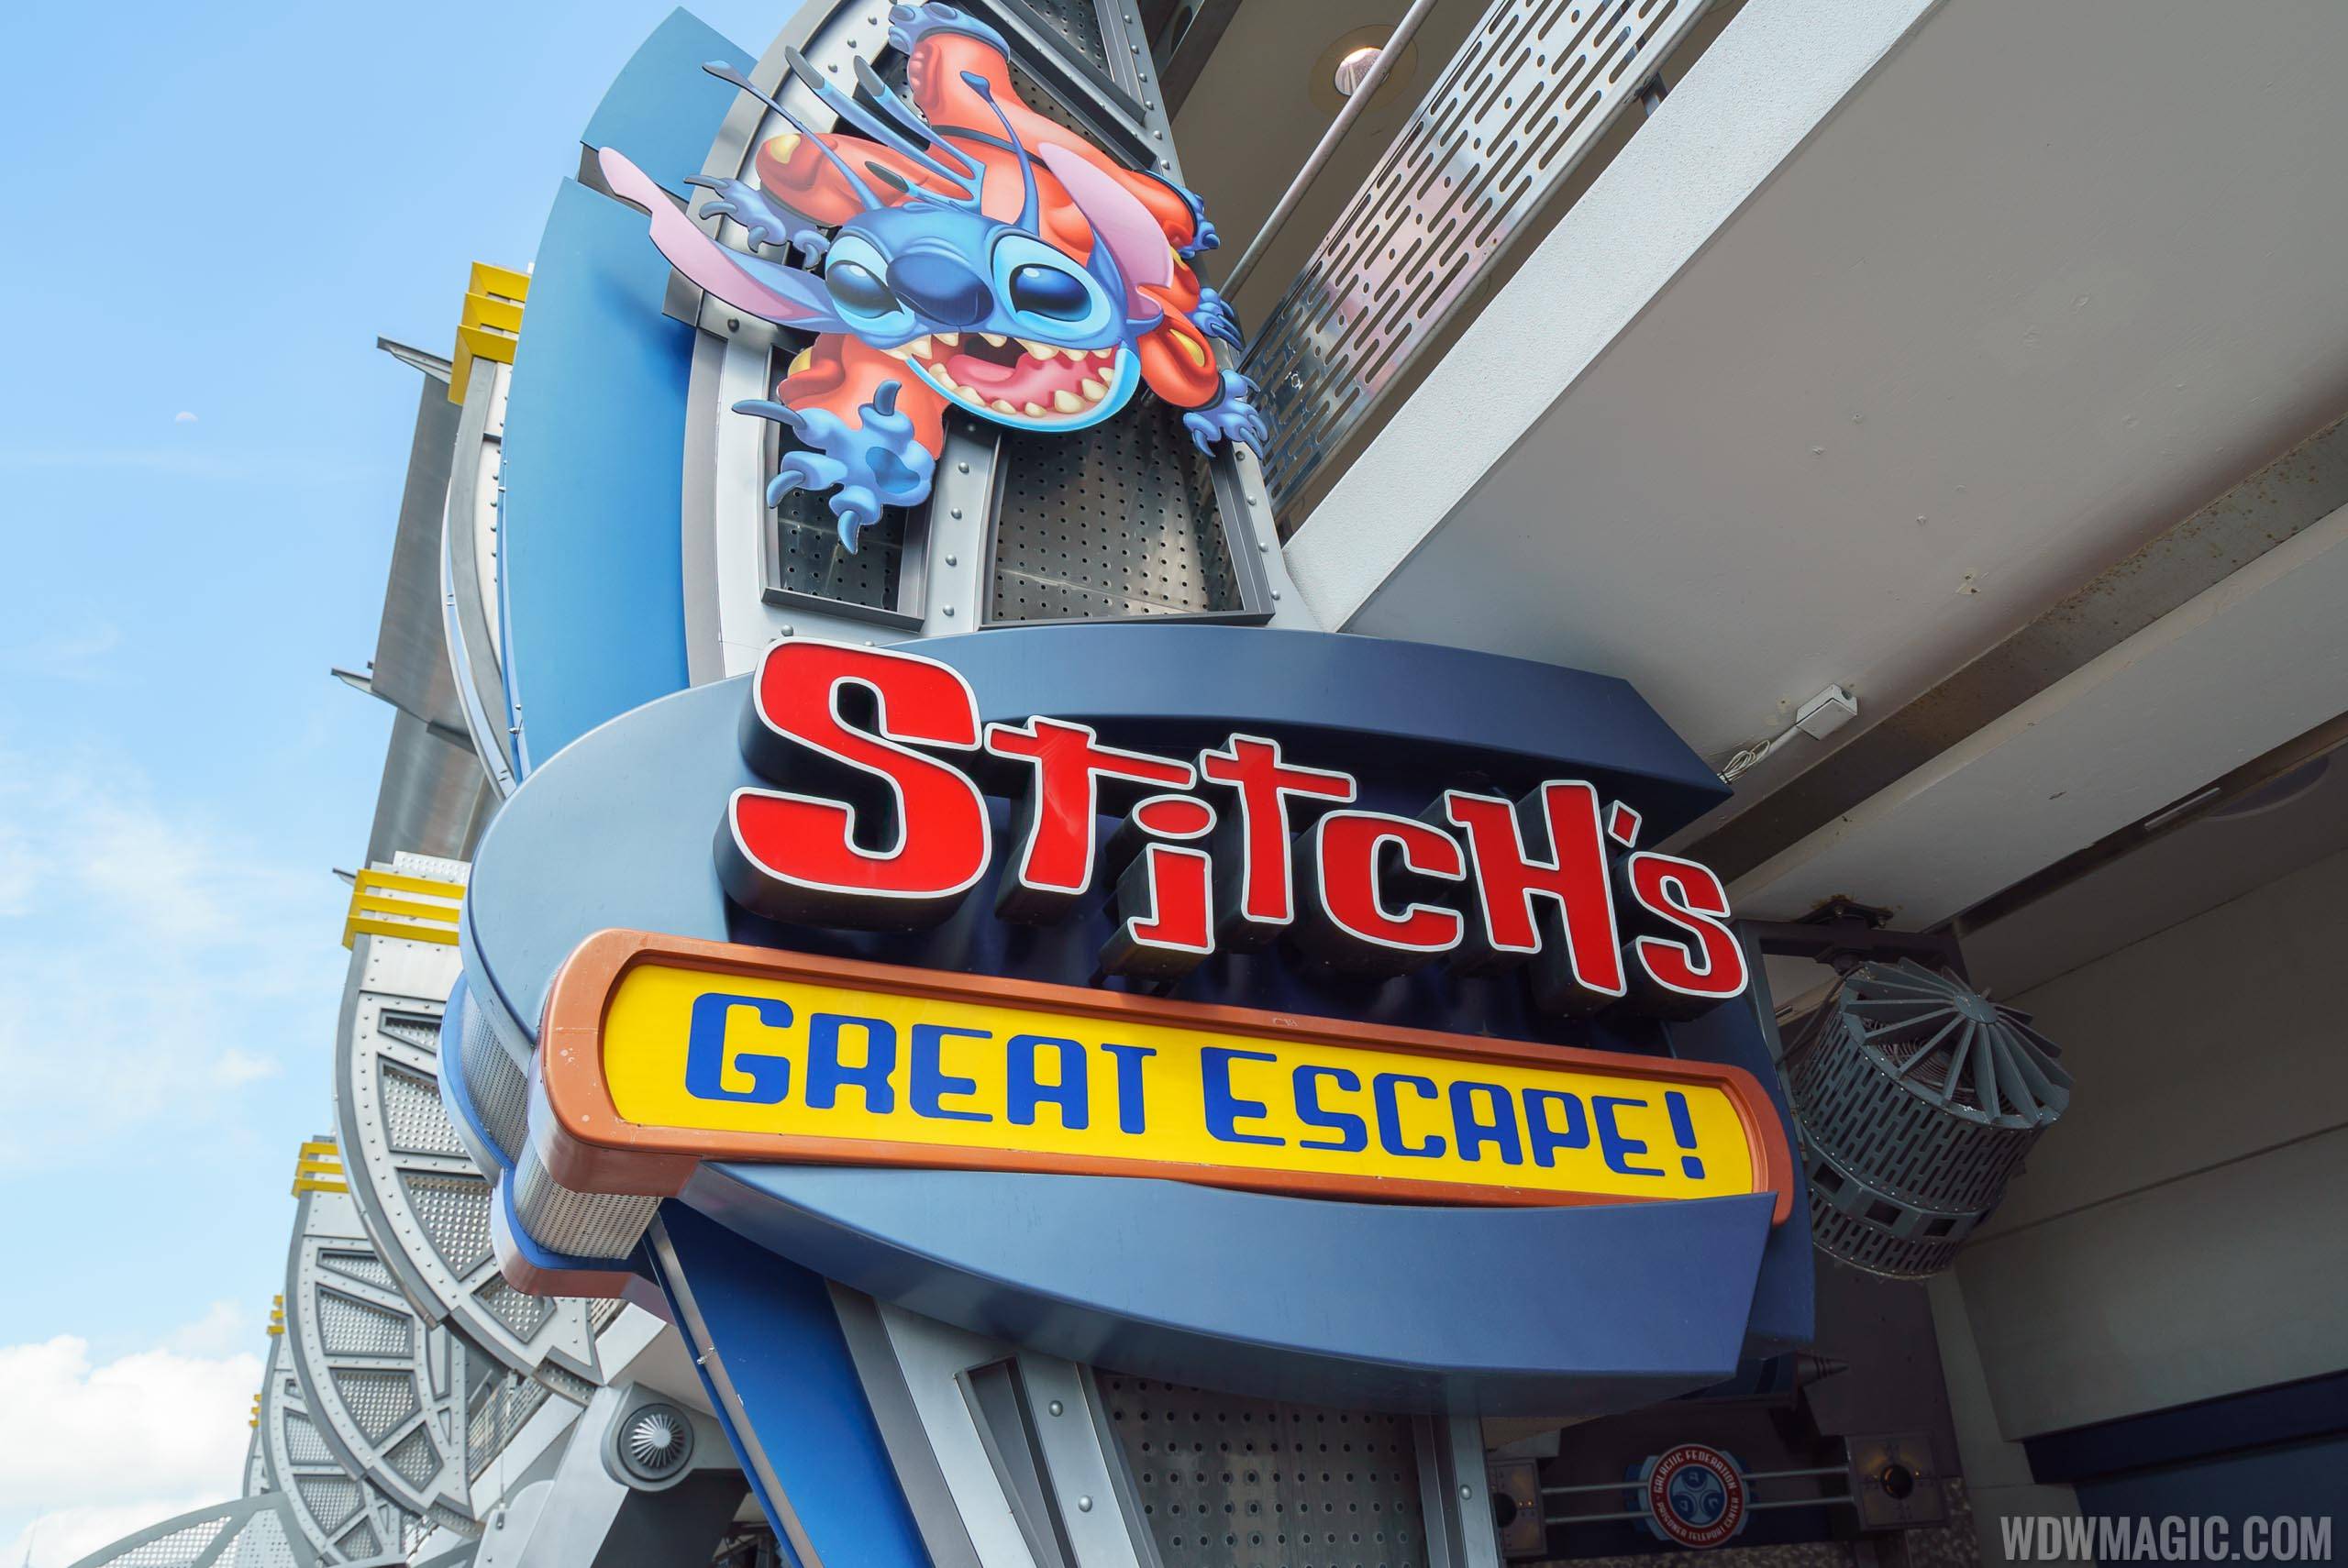 Stitch's Great Escape to resume temporary operation in December